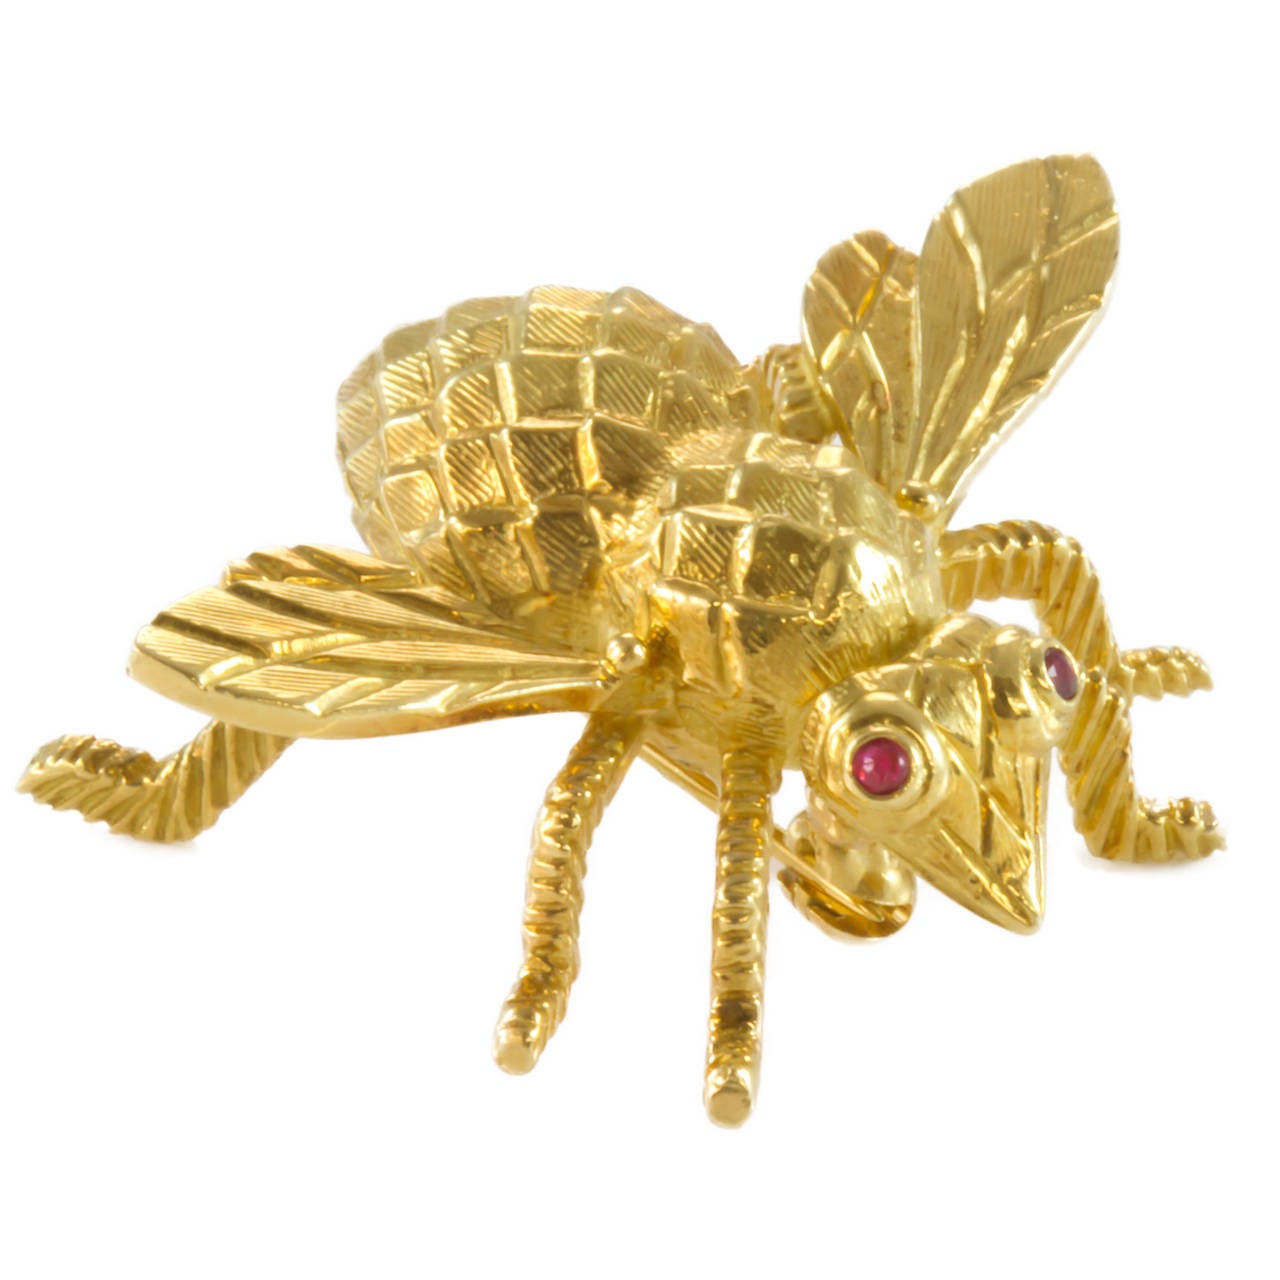 Hand cast bee has texture on both the body and wings. Excellently cast, and hand made in 18K yellow gold. Bezel set rubies were cast for eyes, approximate weight of 0.03. Although bee does not currently have a loop for a necklace, one could be